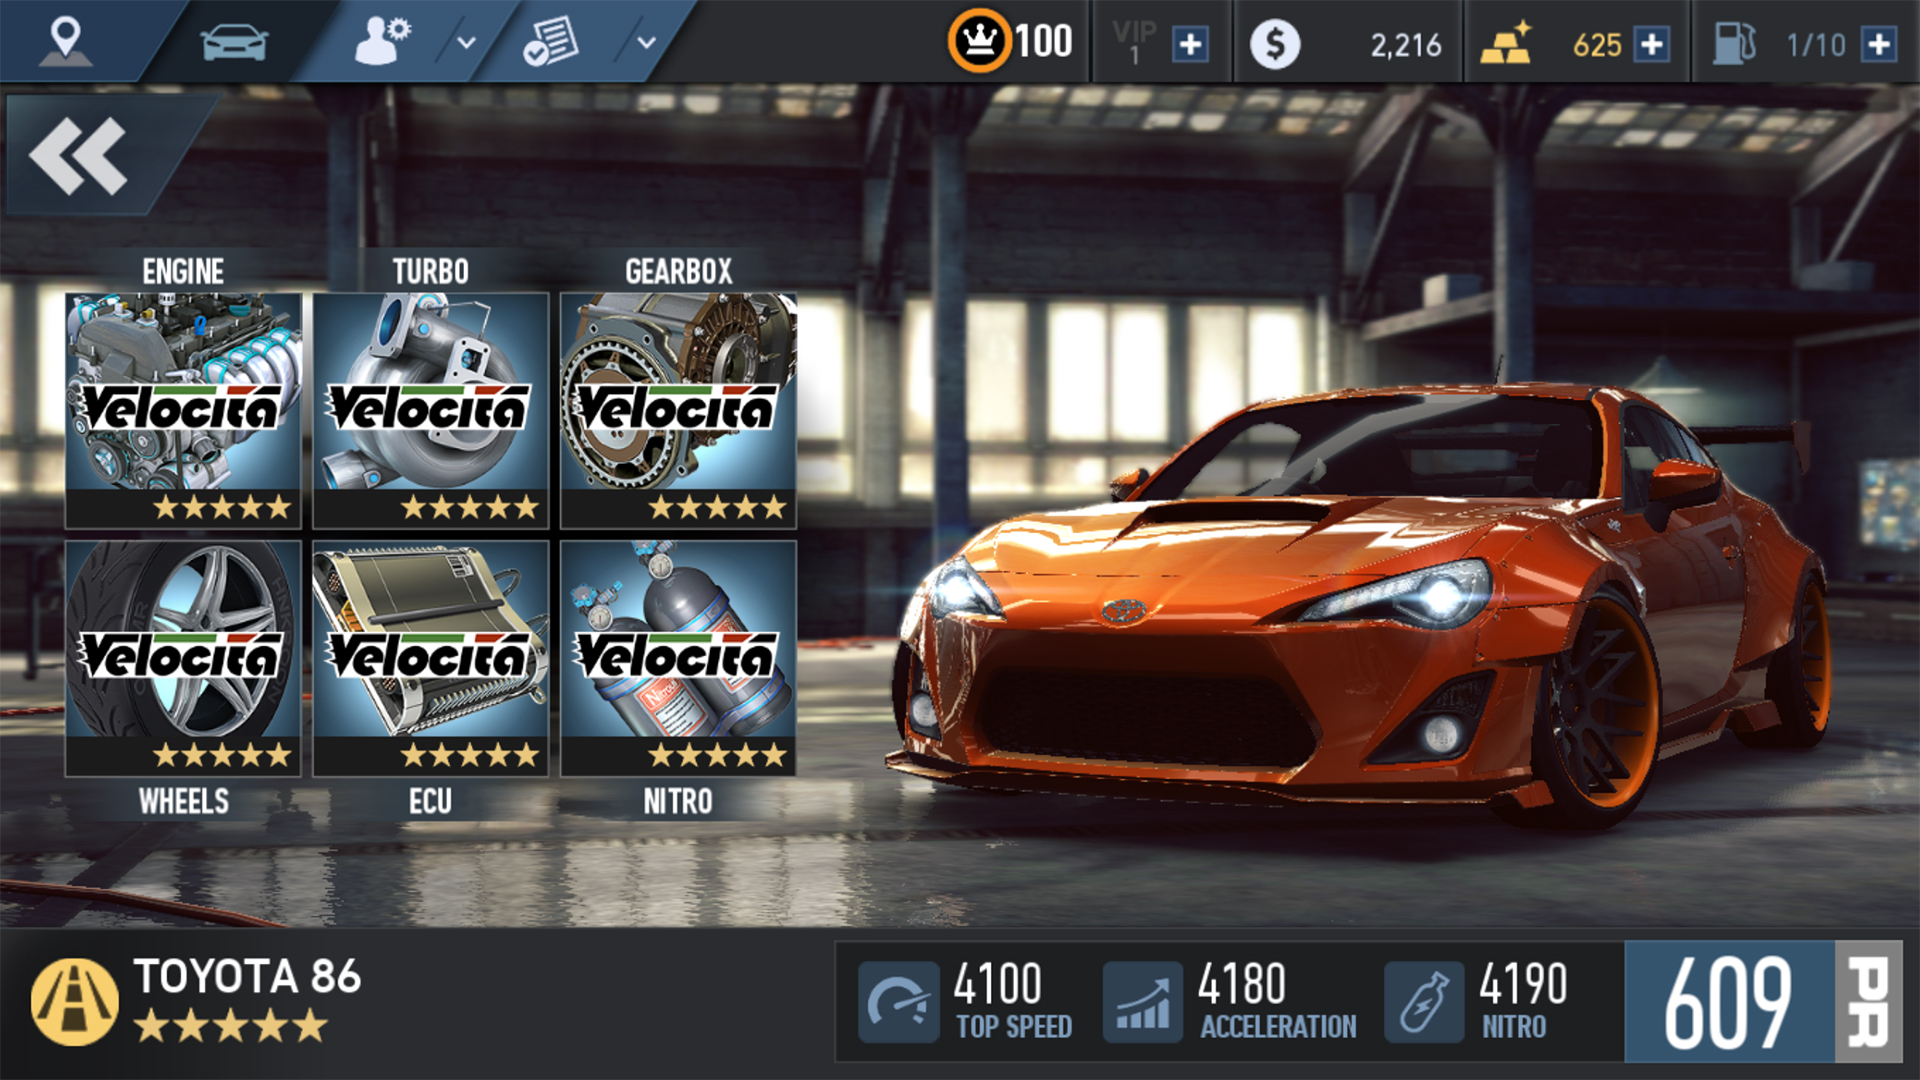 Нфс но лимит деньги золото. Toyota 86 need-for-Speed/need-for-Speed-no-limits. NFS no limits Toyota gt 86. NFS ноу лимит. Ford gt 2006 NFS no limits.